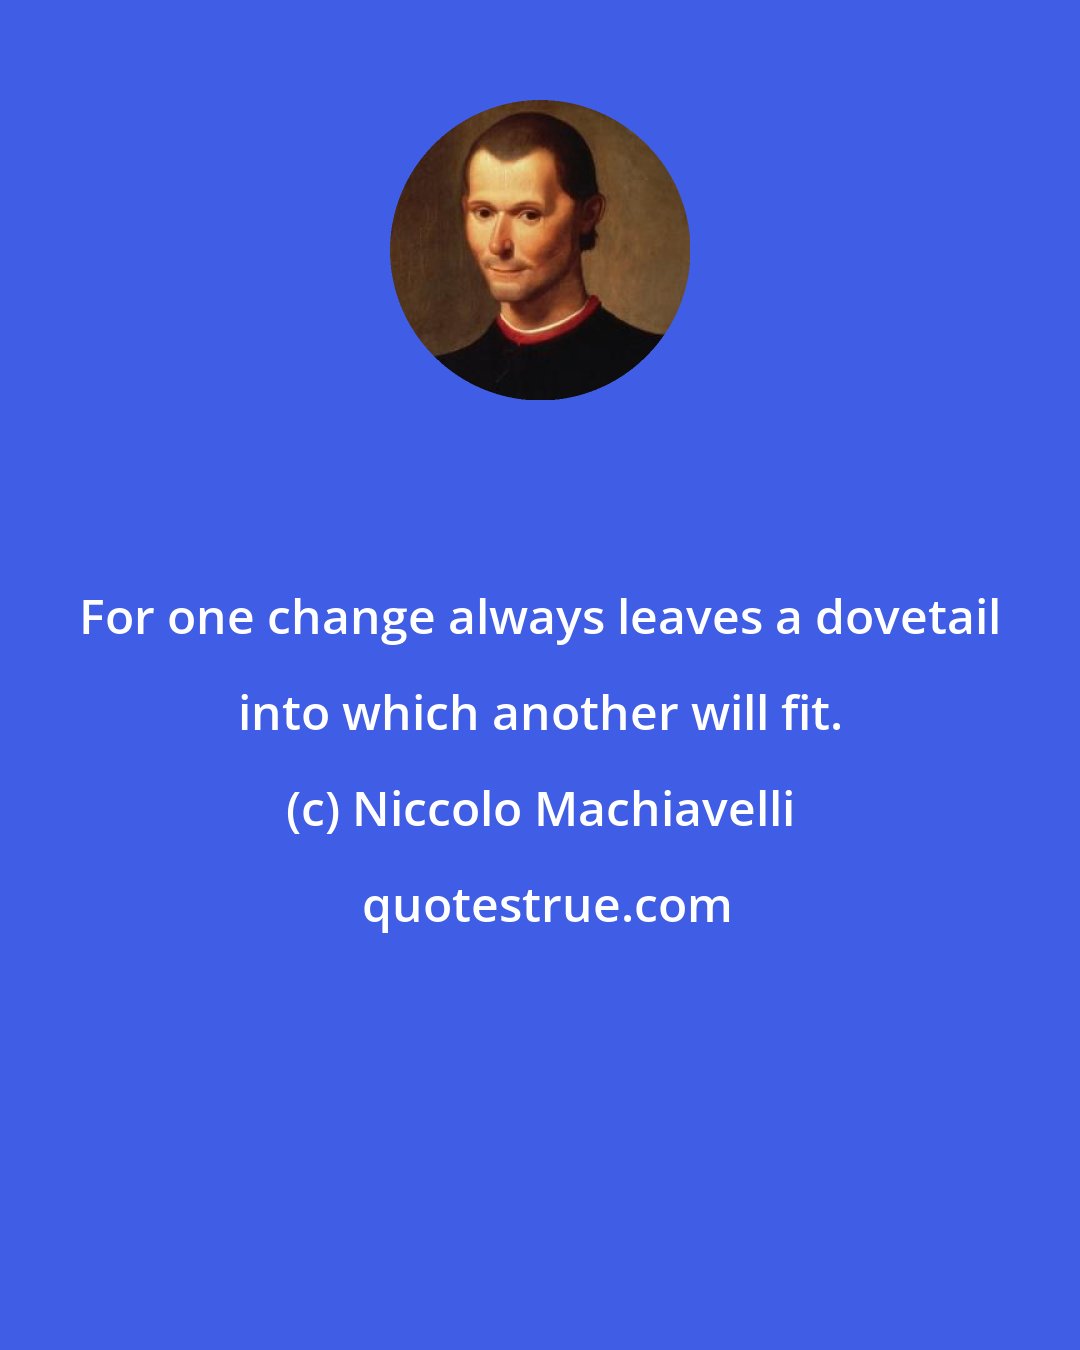 Niccolo Machiavelli: For one change always leaves a dovetail into which another will fit.